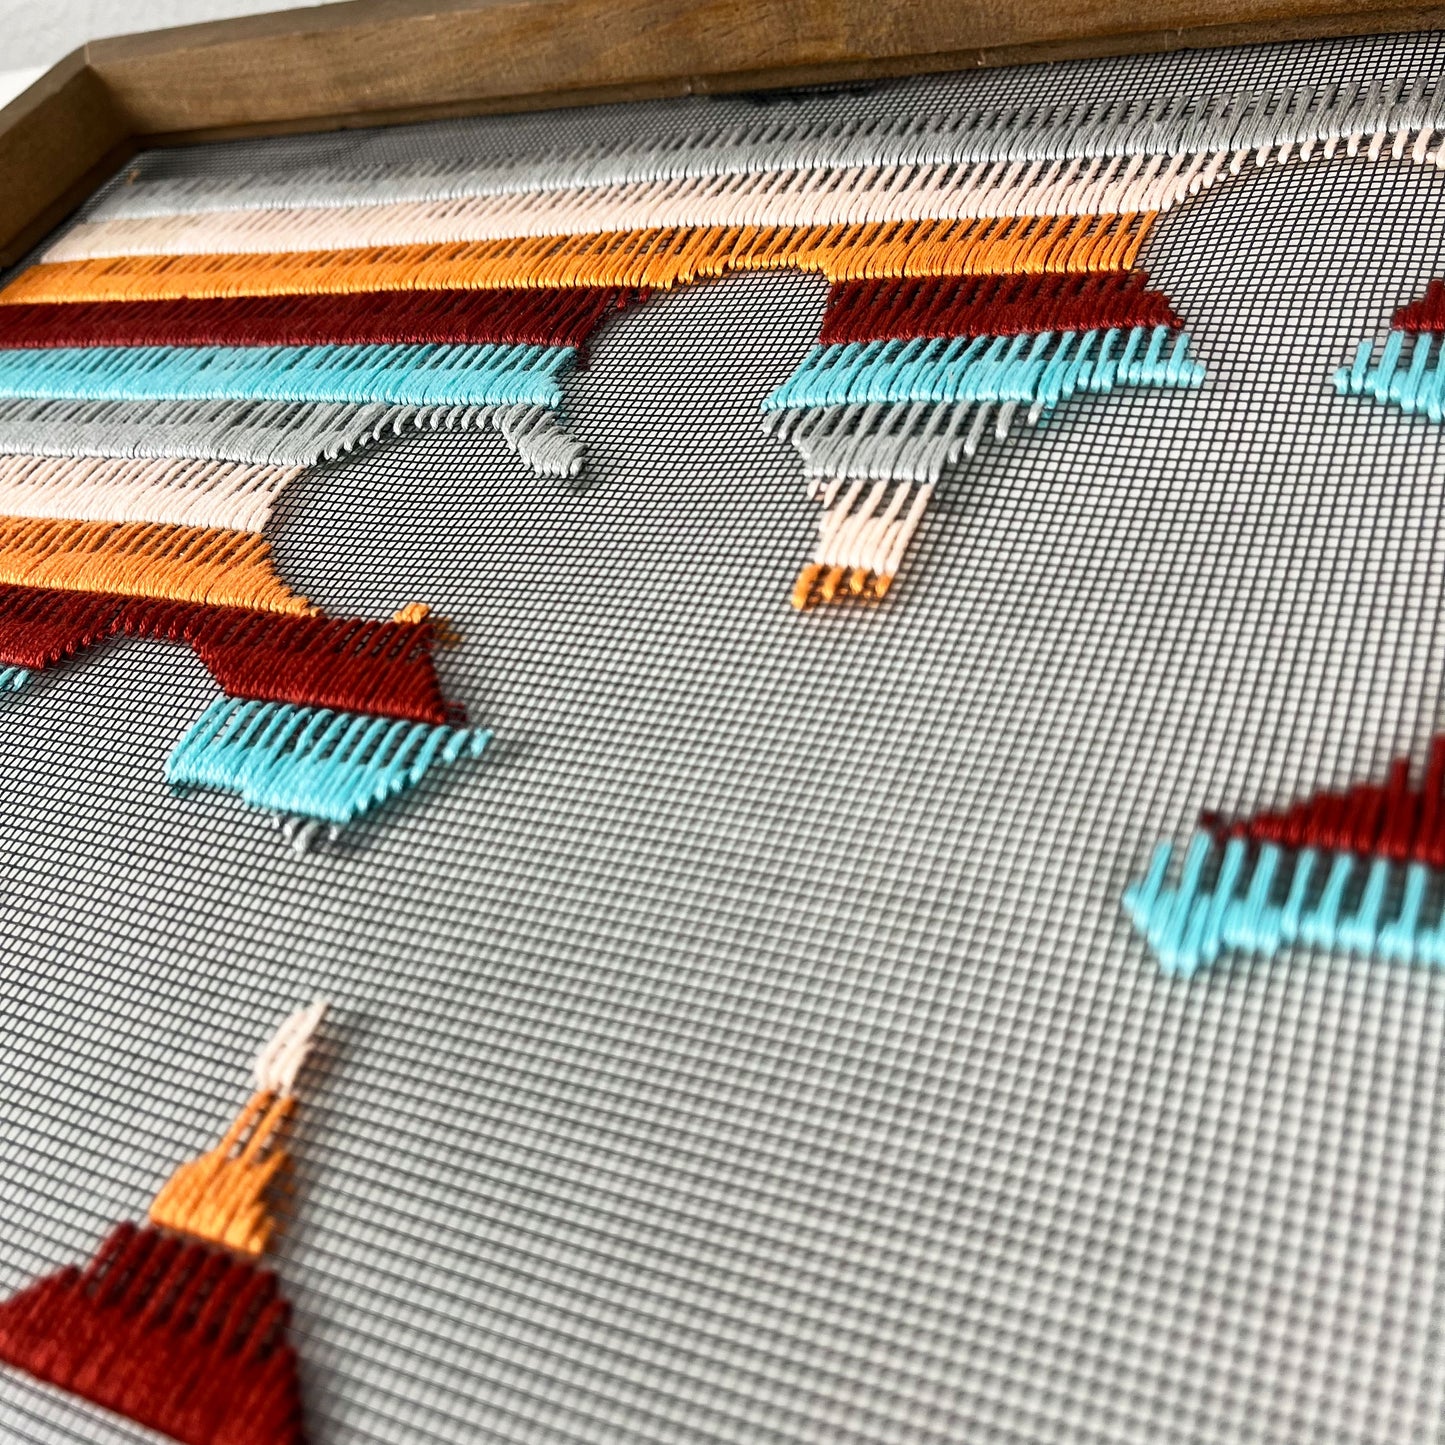 close up angled view of a piece of window screen hand stitched with rows of maroon orange peach grey and aqua blue stitches with an image in negative space of a prickly pear cactus, in a square wood frame, on a white counter